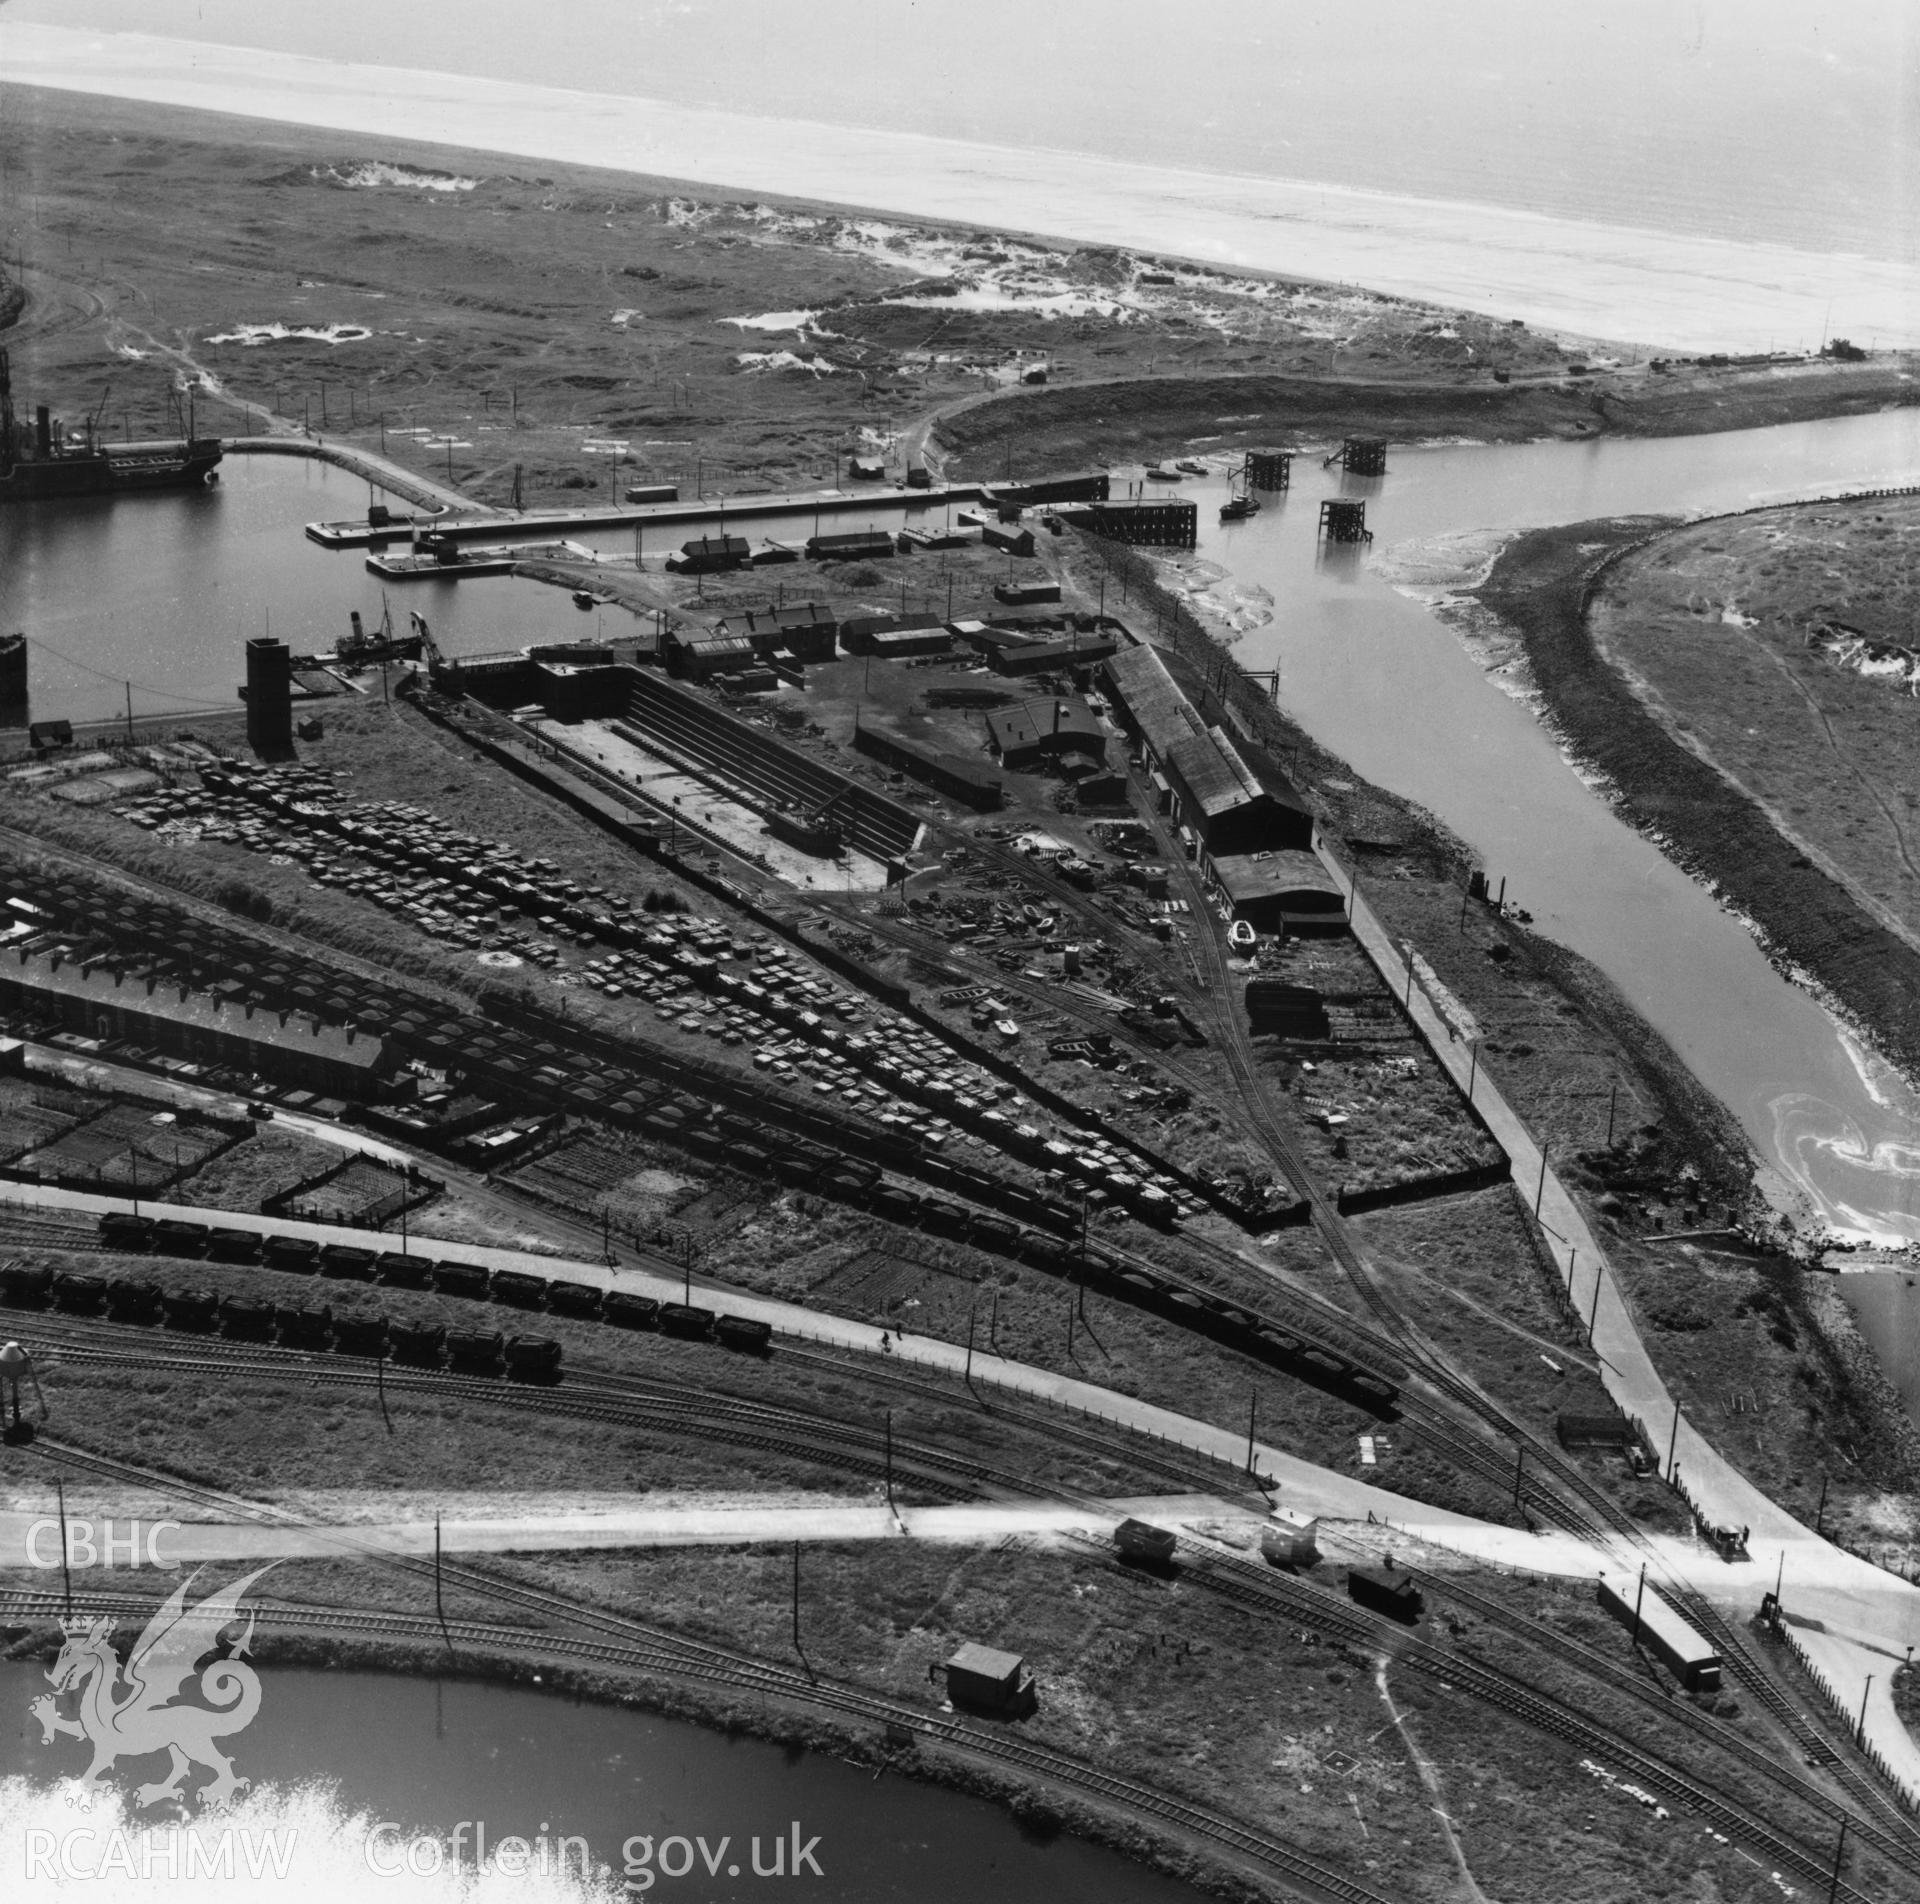 View of dry, new and old docks and entrance channel, Port Talbot. Oblique aerial photograph, 5?" cut roll film.